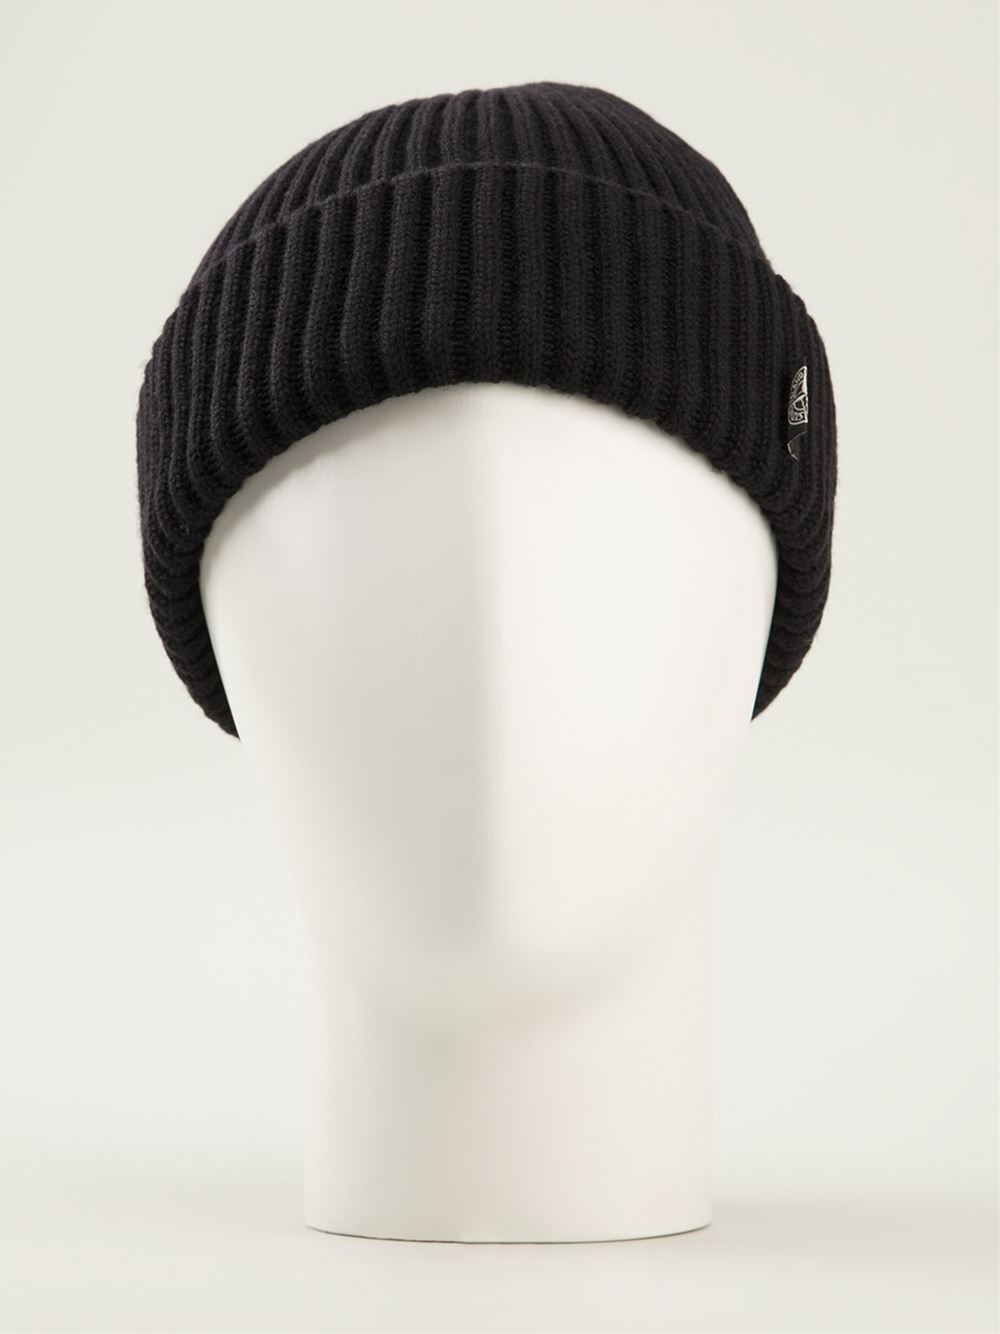 Lyst - Stone Island Ribbed Beanie in Black for Men